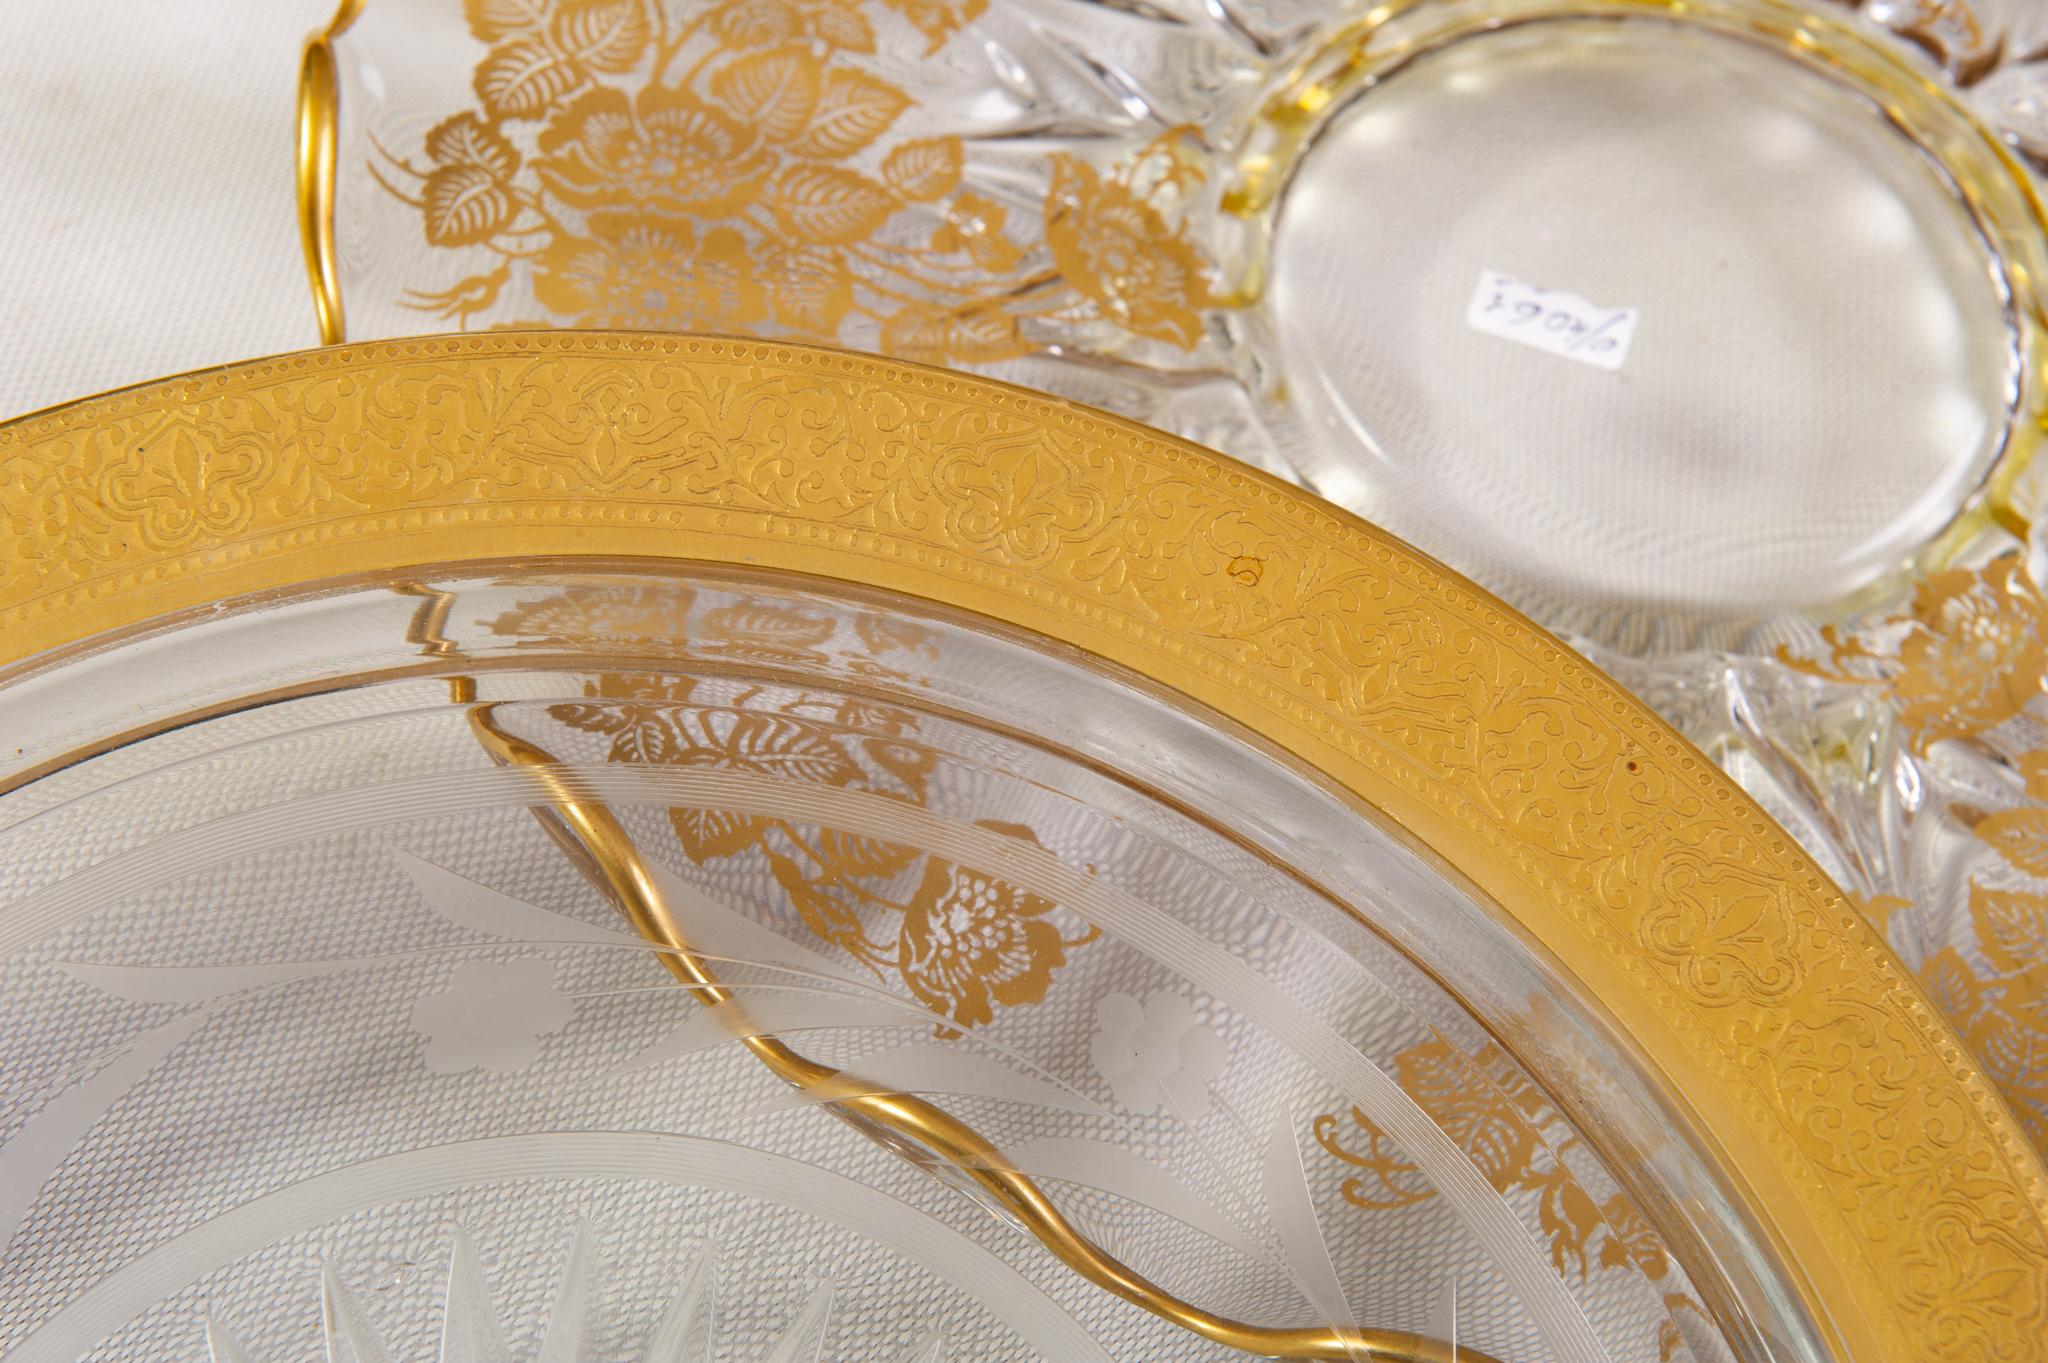 American Classical American Glass Plates Printed in Gold in Different Sizes For Sale